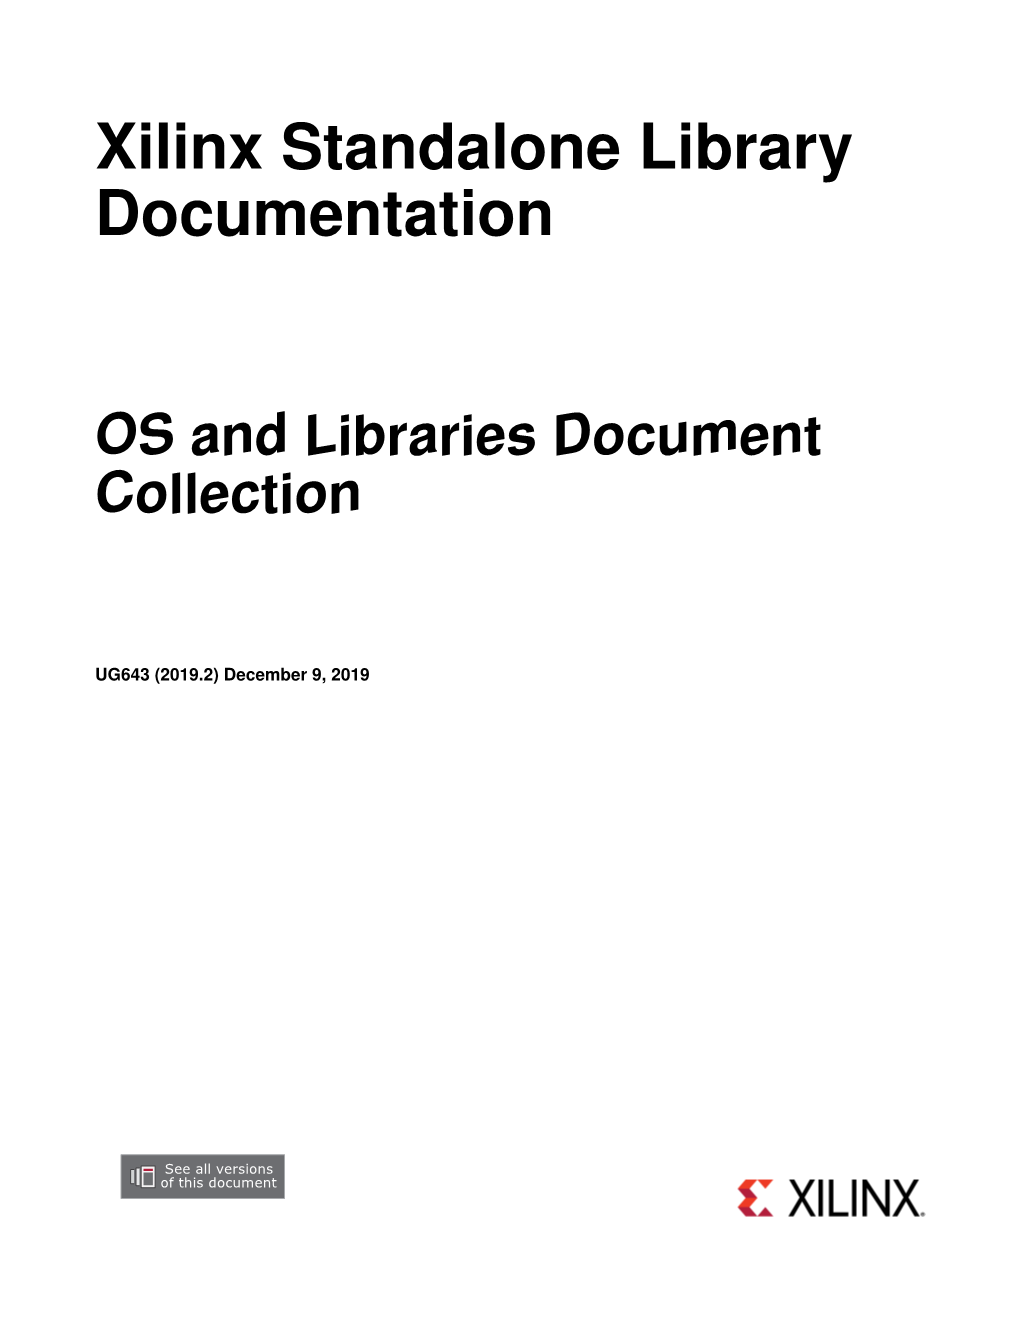 OS and Libraries Document Collection